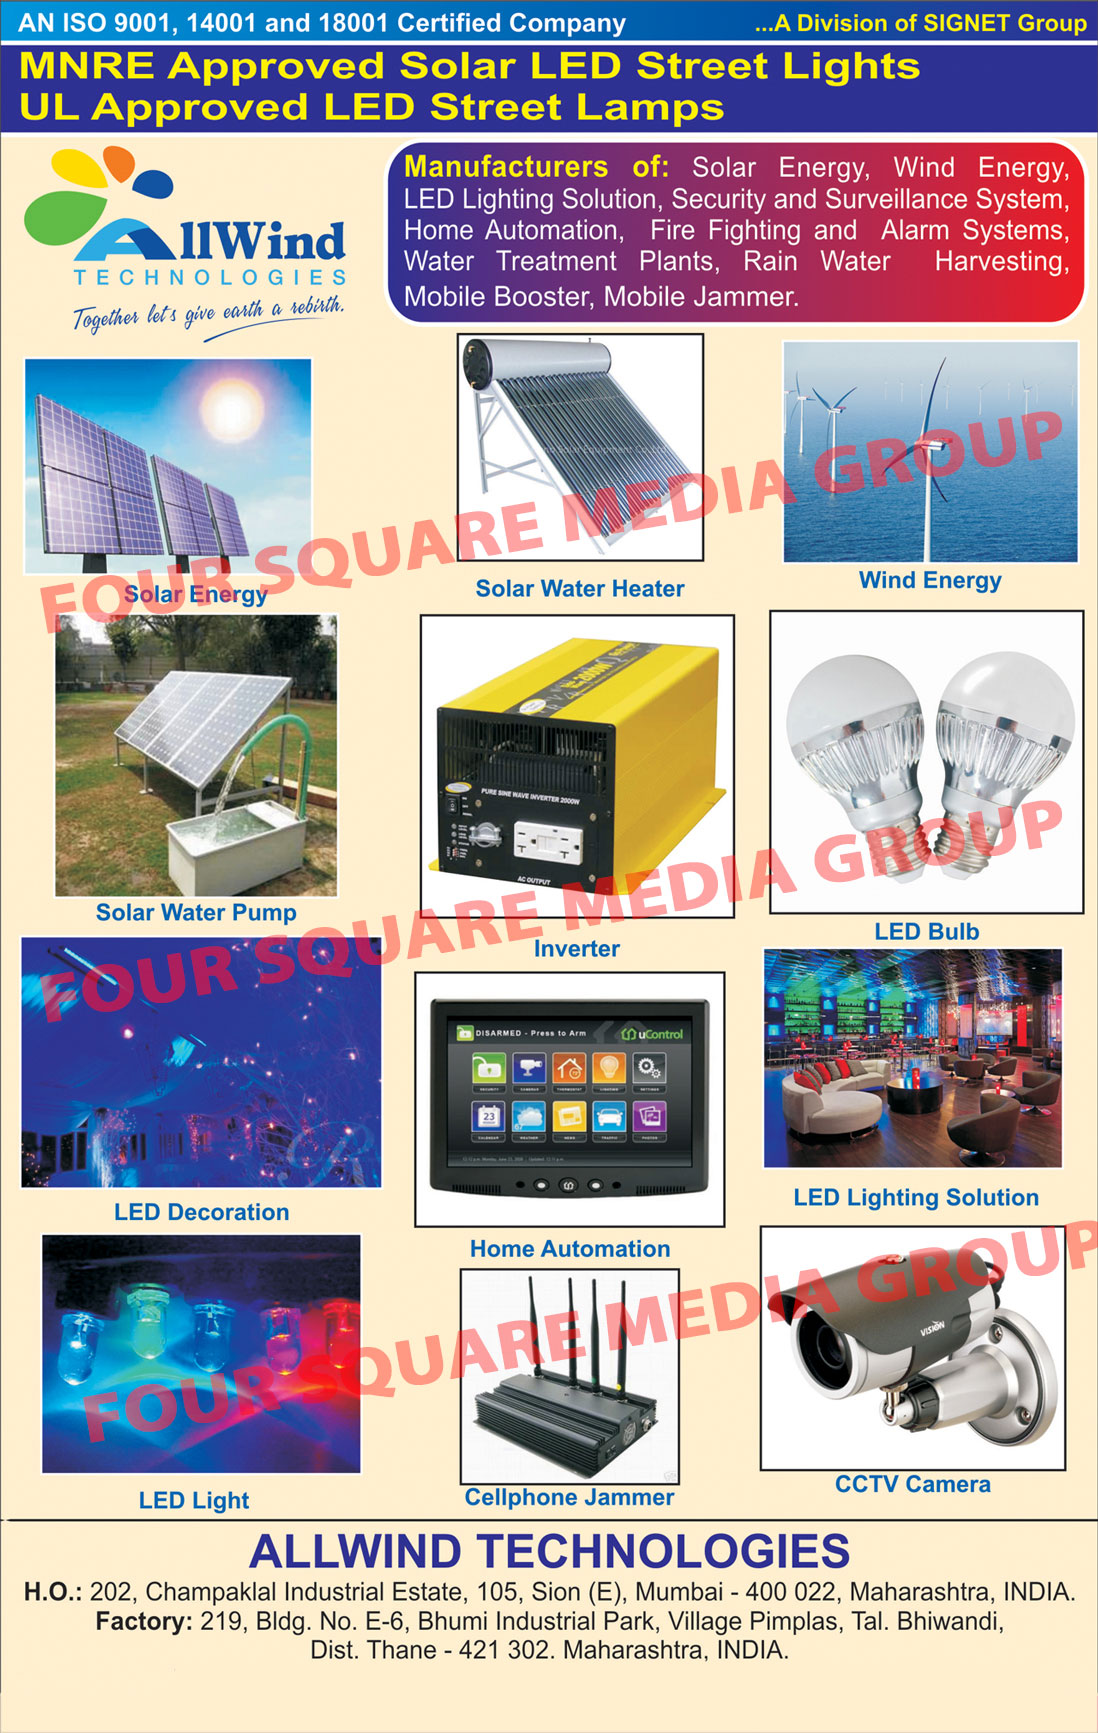 Solar Energy, Wind Energy, Led Lights, Security Surveillance, Home Automation, Fire Fighting Alarms, Water Treatment Plants,Solar Water Heaters, Solar Water Pumps, Inverter, LED Bulbs, LED Decoration, LED Light Solution, LED Lights, Cellphone Jammer, CCTV Camera, Fire Fighting and Alarm Systems, Rain Water Harvesting, Mobile Booster, LED Light Solution, Mobile Jammer, Fire Safety Products